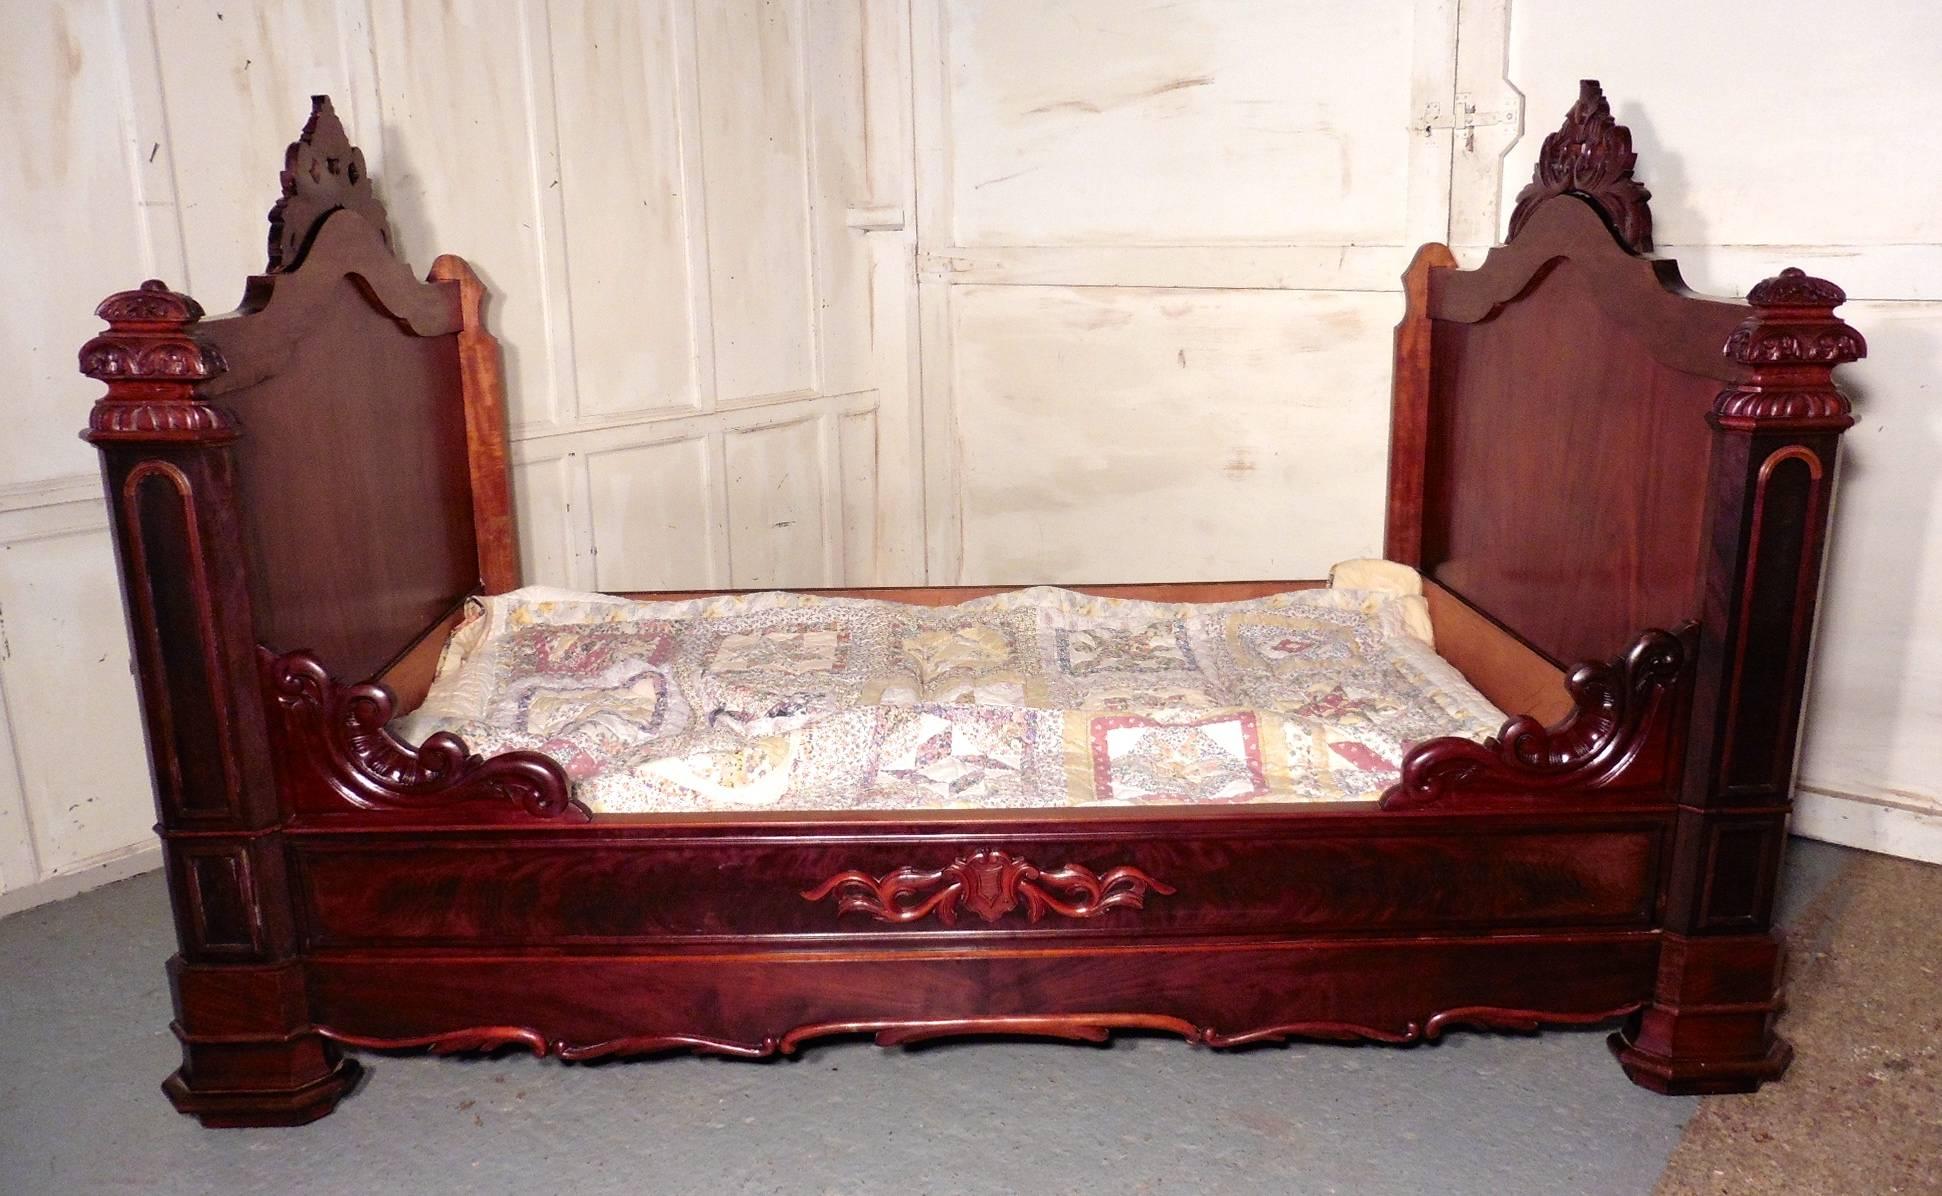 French flame mahogany and walnut sleigh bed or Empire style daybed

This is a large sleigh bed or Empire style daybed, which would look fantastic piled up with comfy cushions.
Both ends are the same height with a rounded top rail and an elaborate